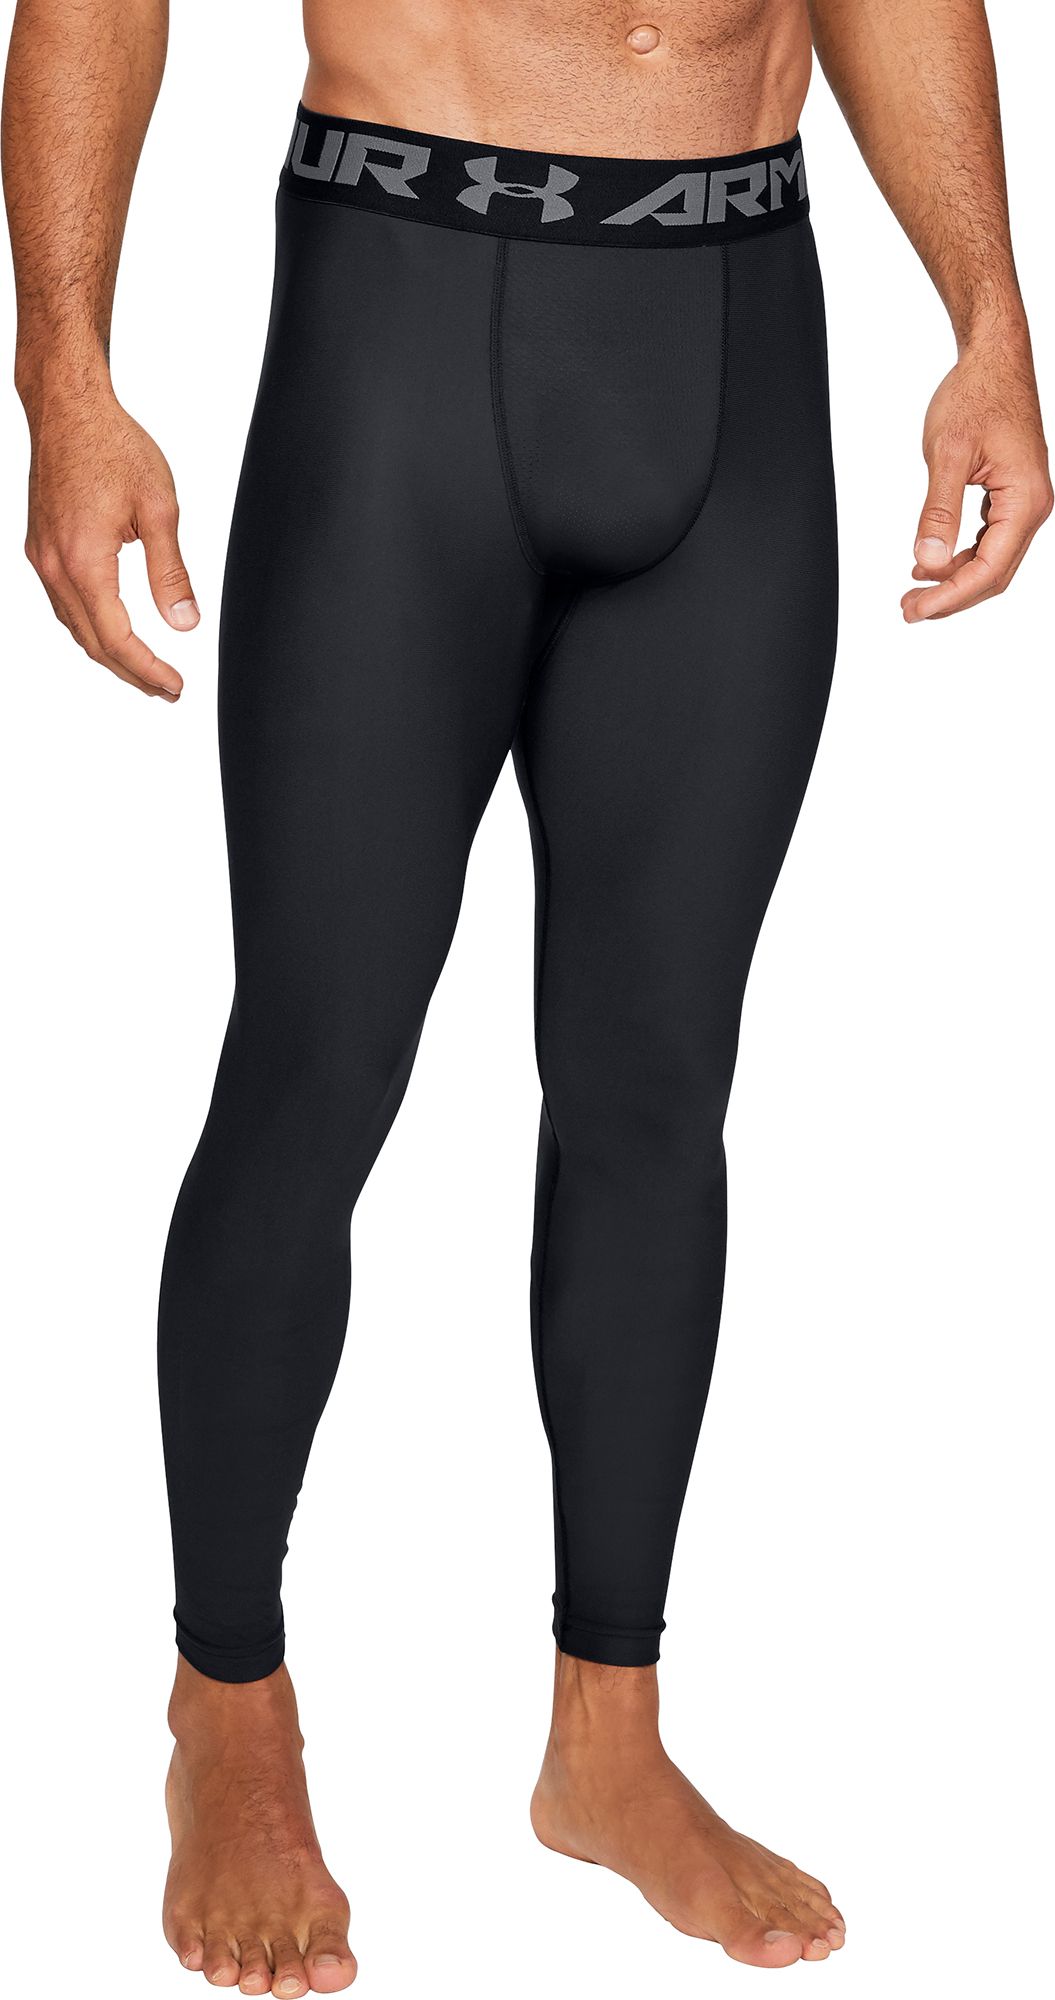 Compression Pants Tights For Men Best Price Guarantee At